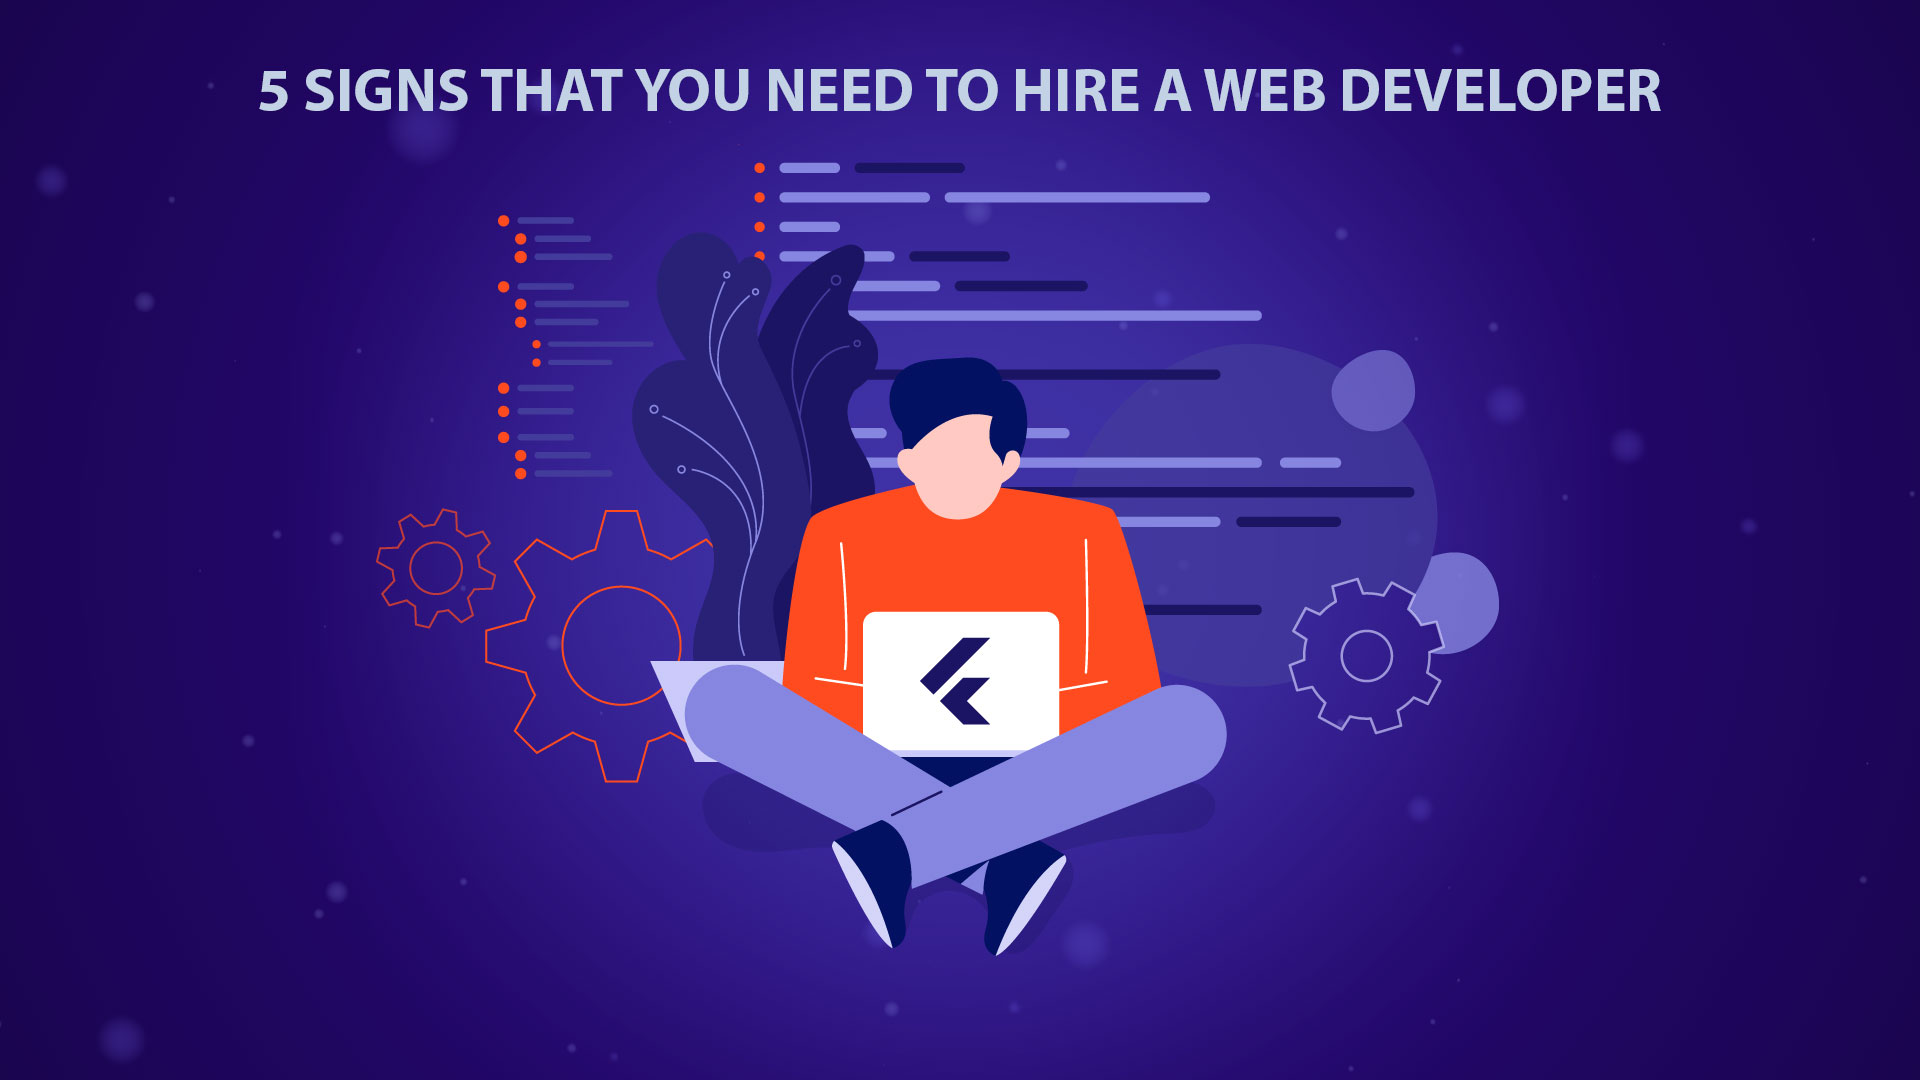 5 signs that you need to hire a web developer